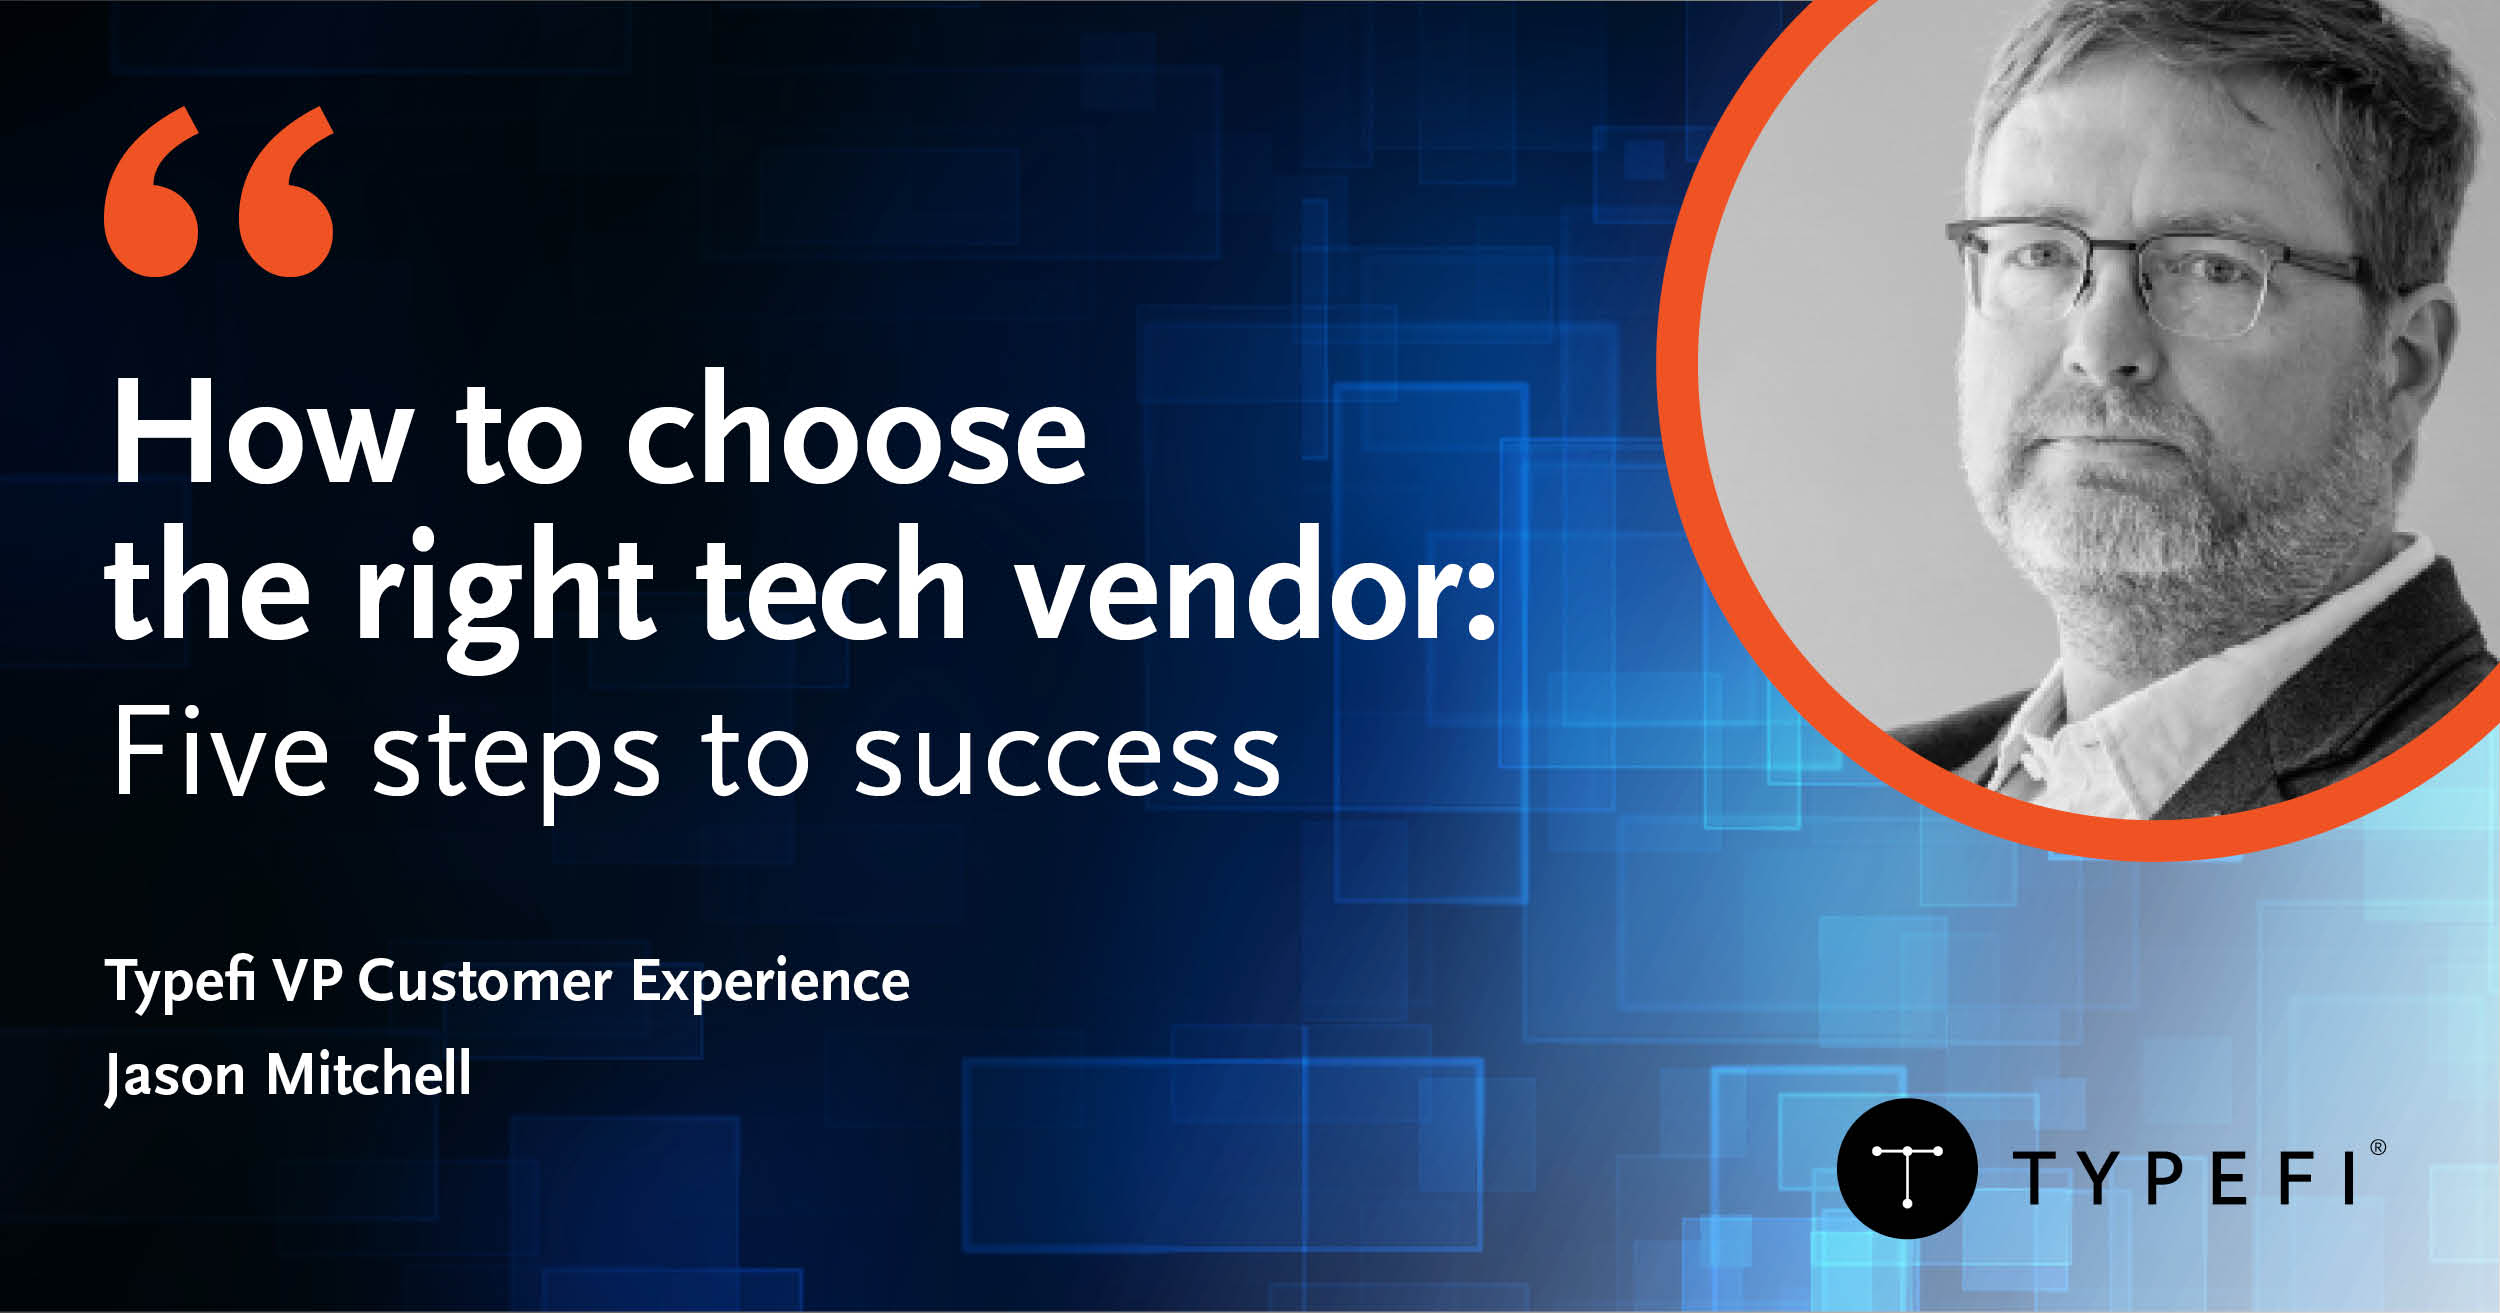 Image promoting Jason Mitchell's article on choosing the right tech vendor.